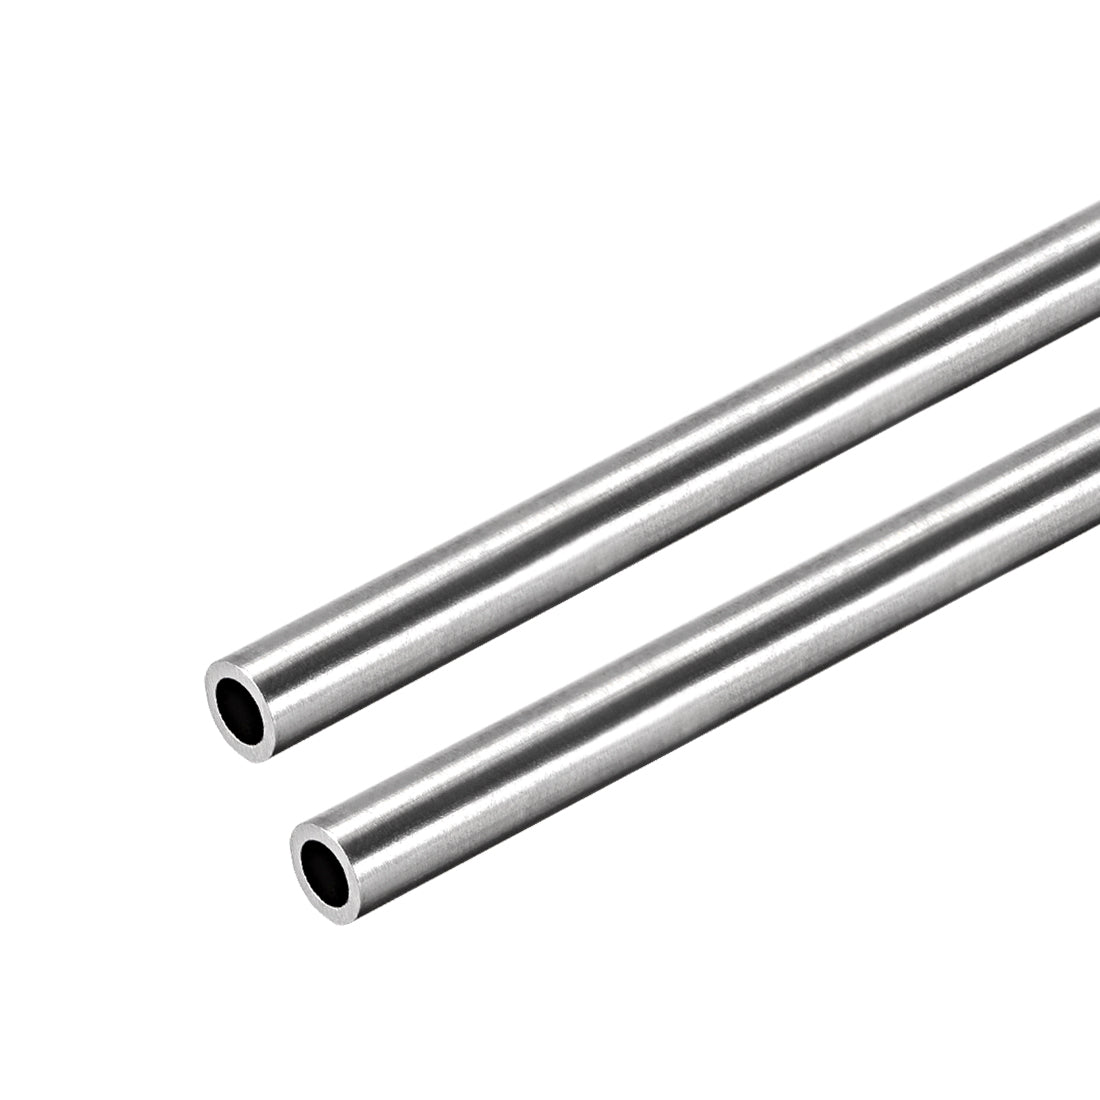 uxcell Uxcell 304 Stainless Steel Round Tubing 6mm OD 1mm Wall Thickness 250mm Length Seamless Straight Pipe Tube 2 Pcs